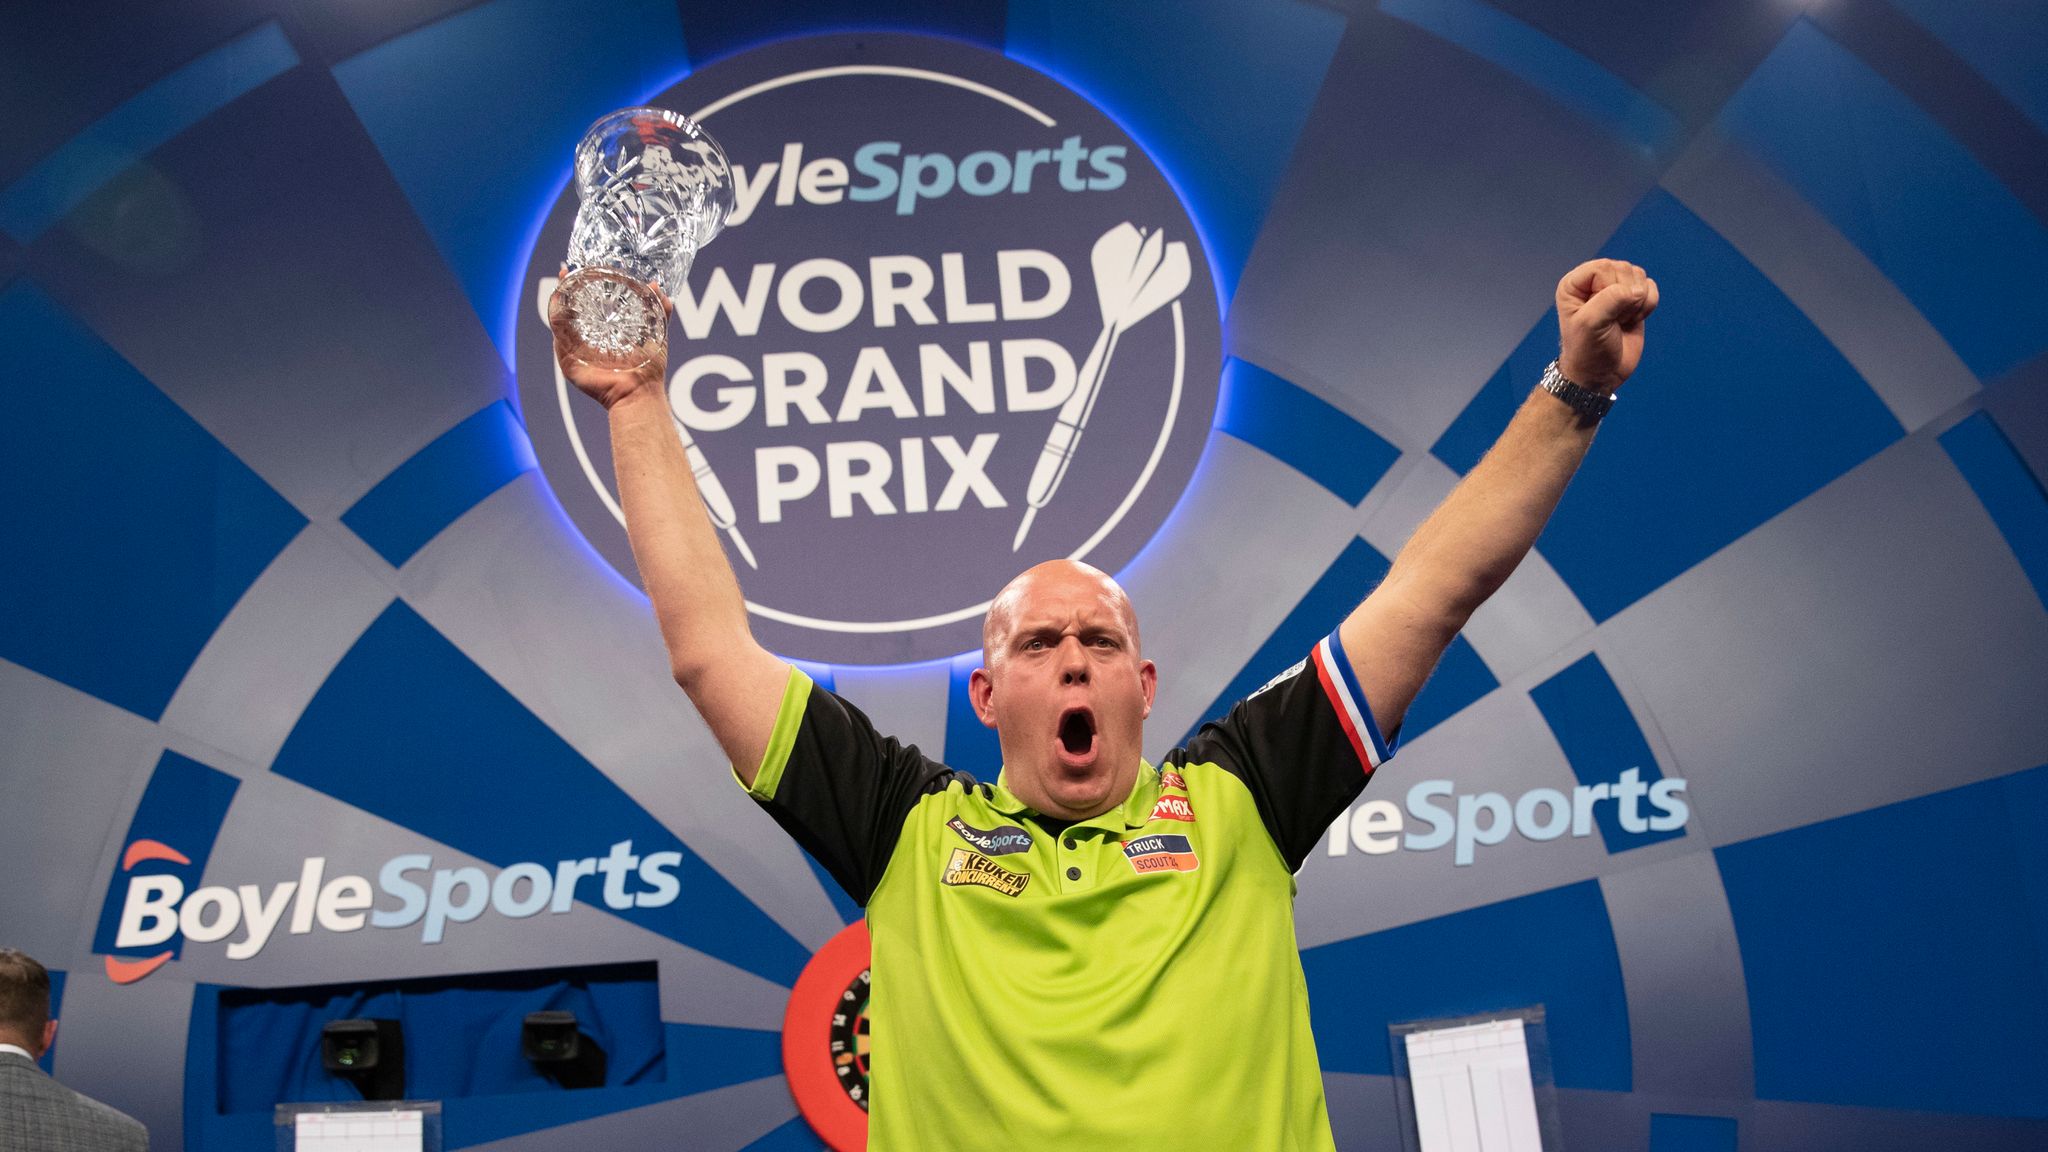 Michael van Gerwen in the mood to add to his World Grand Prix title at the busiest time of the darting year Darts News Sky Sports